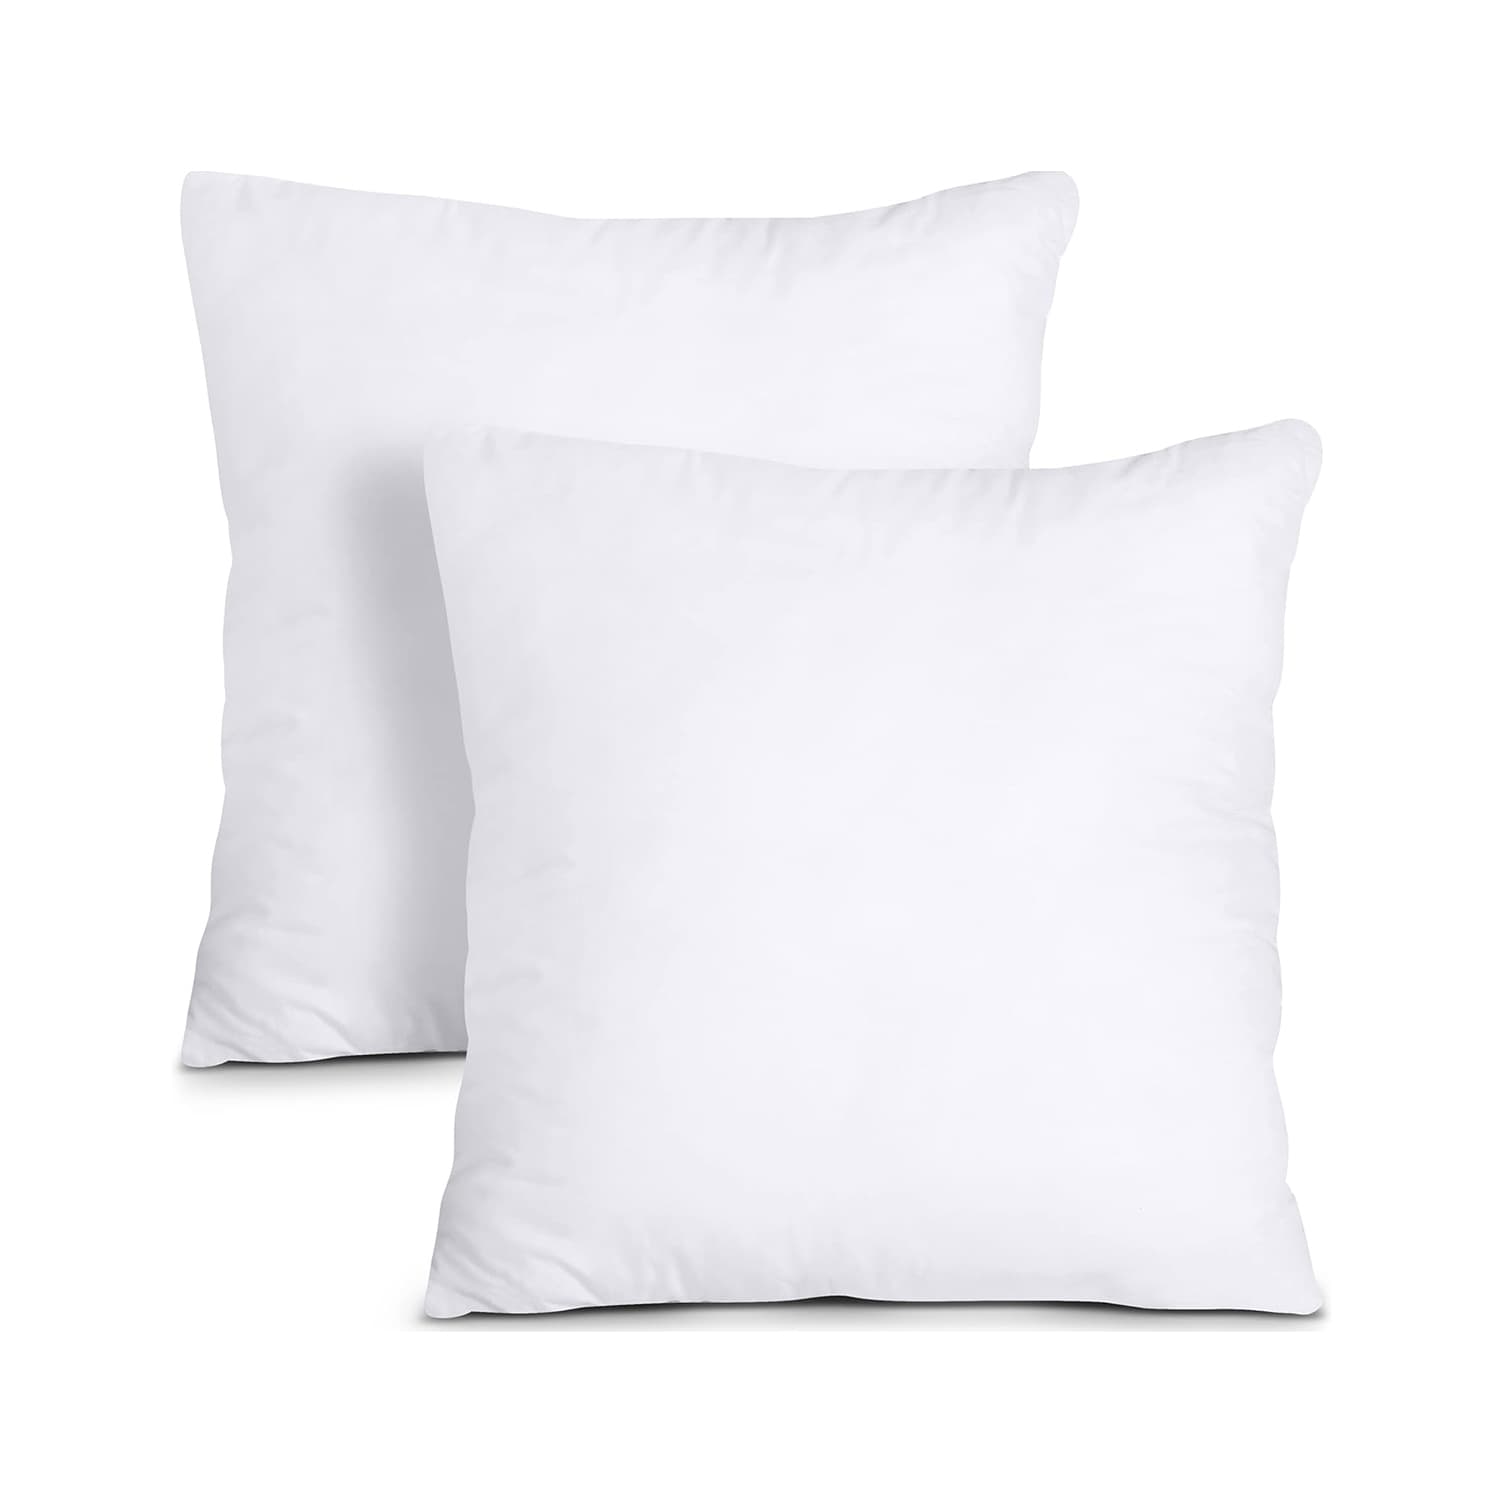 Utopia Bedding Throw Pillows: The Ultimate Guide to Comfort and Style, by   Products